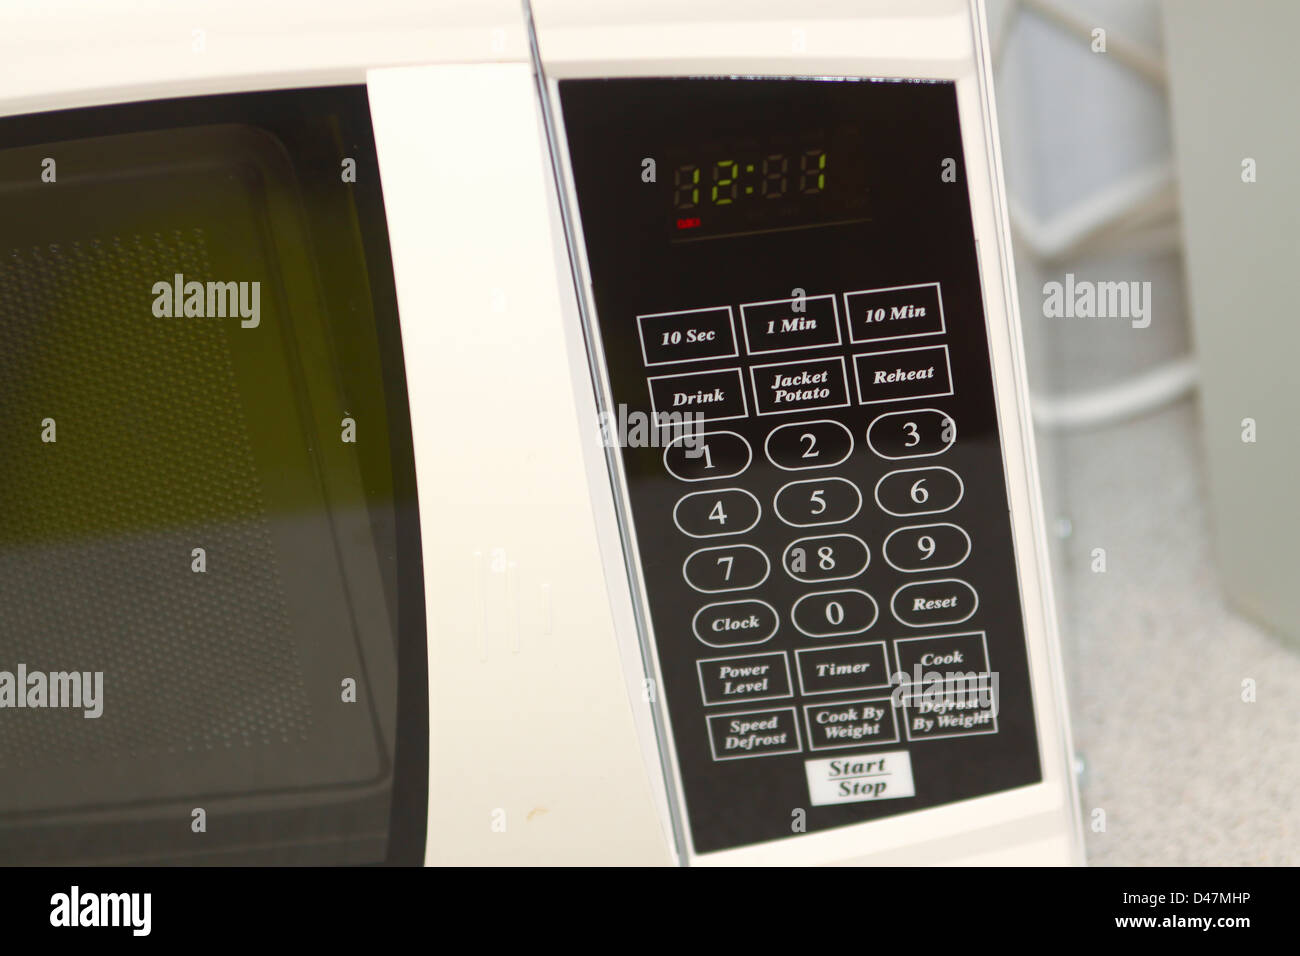 Digital control panel on microwave oven Stock Photo